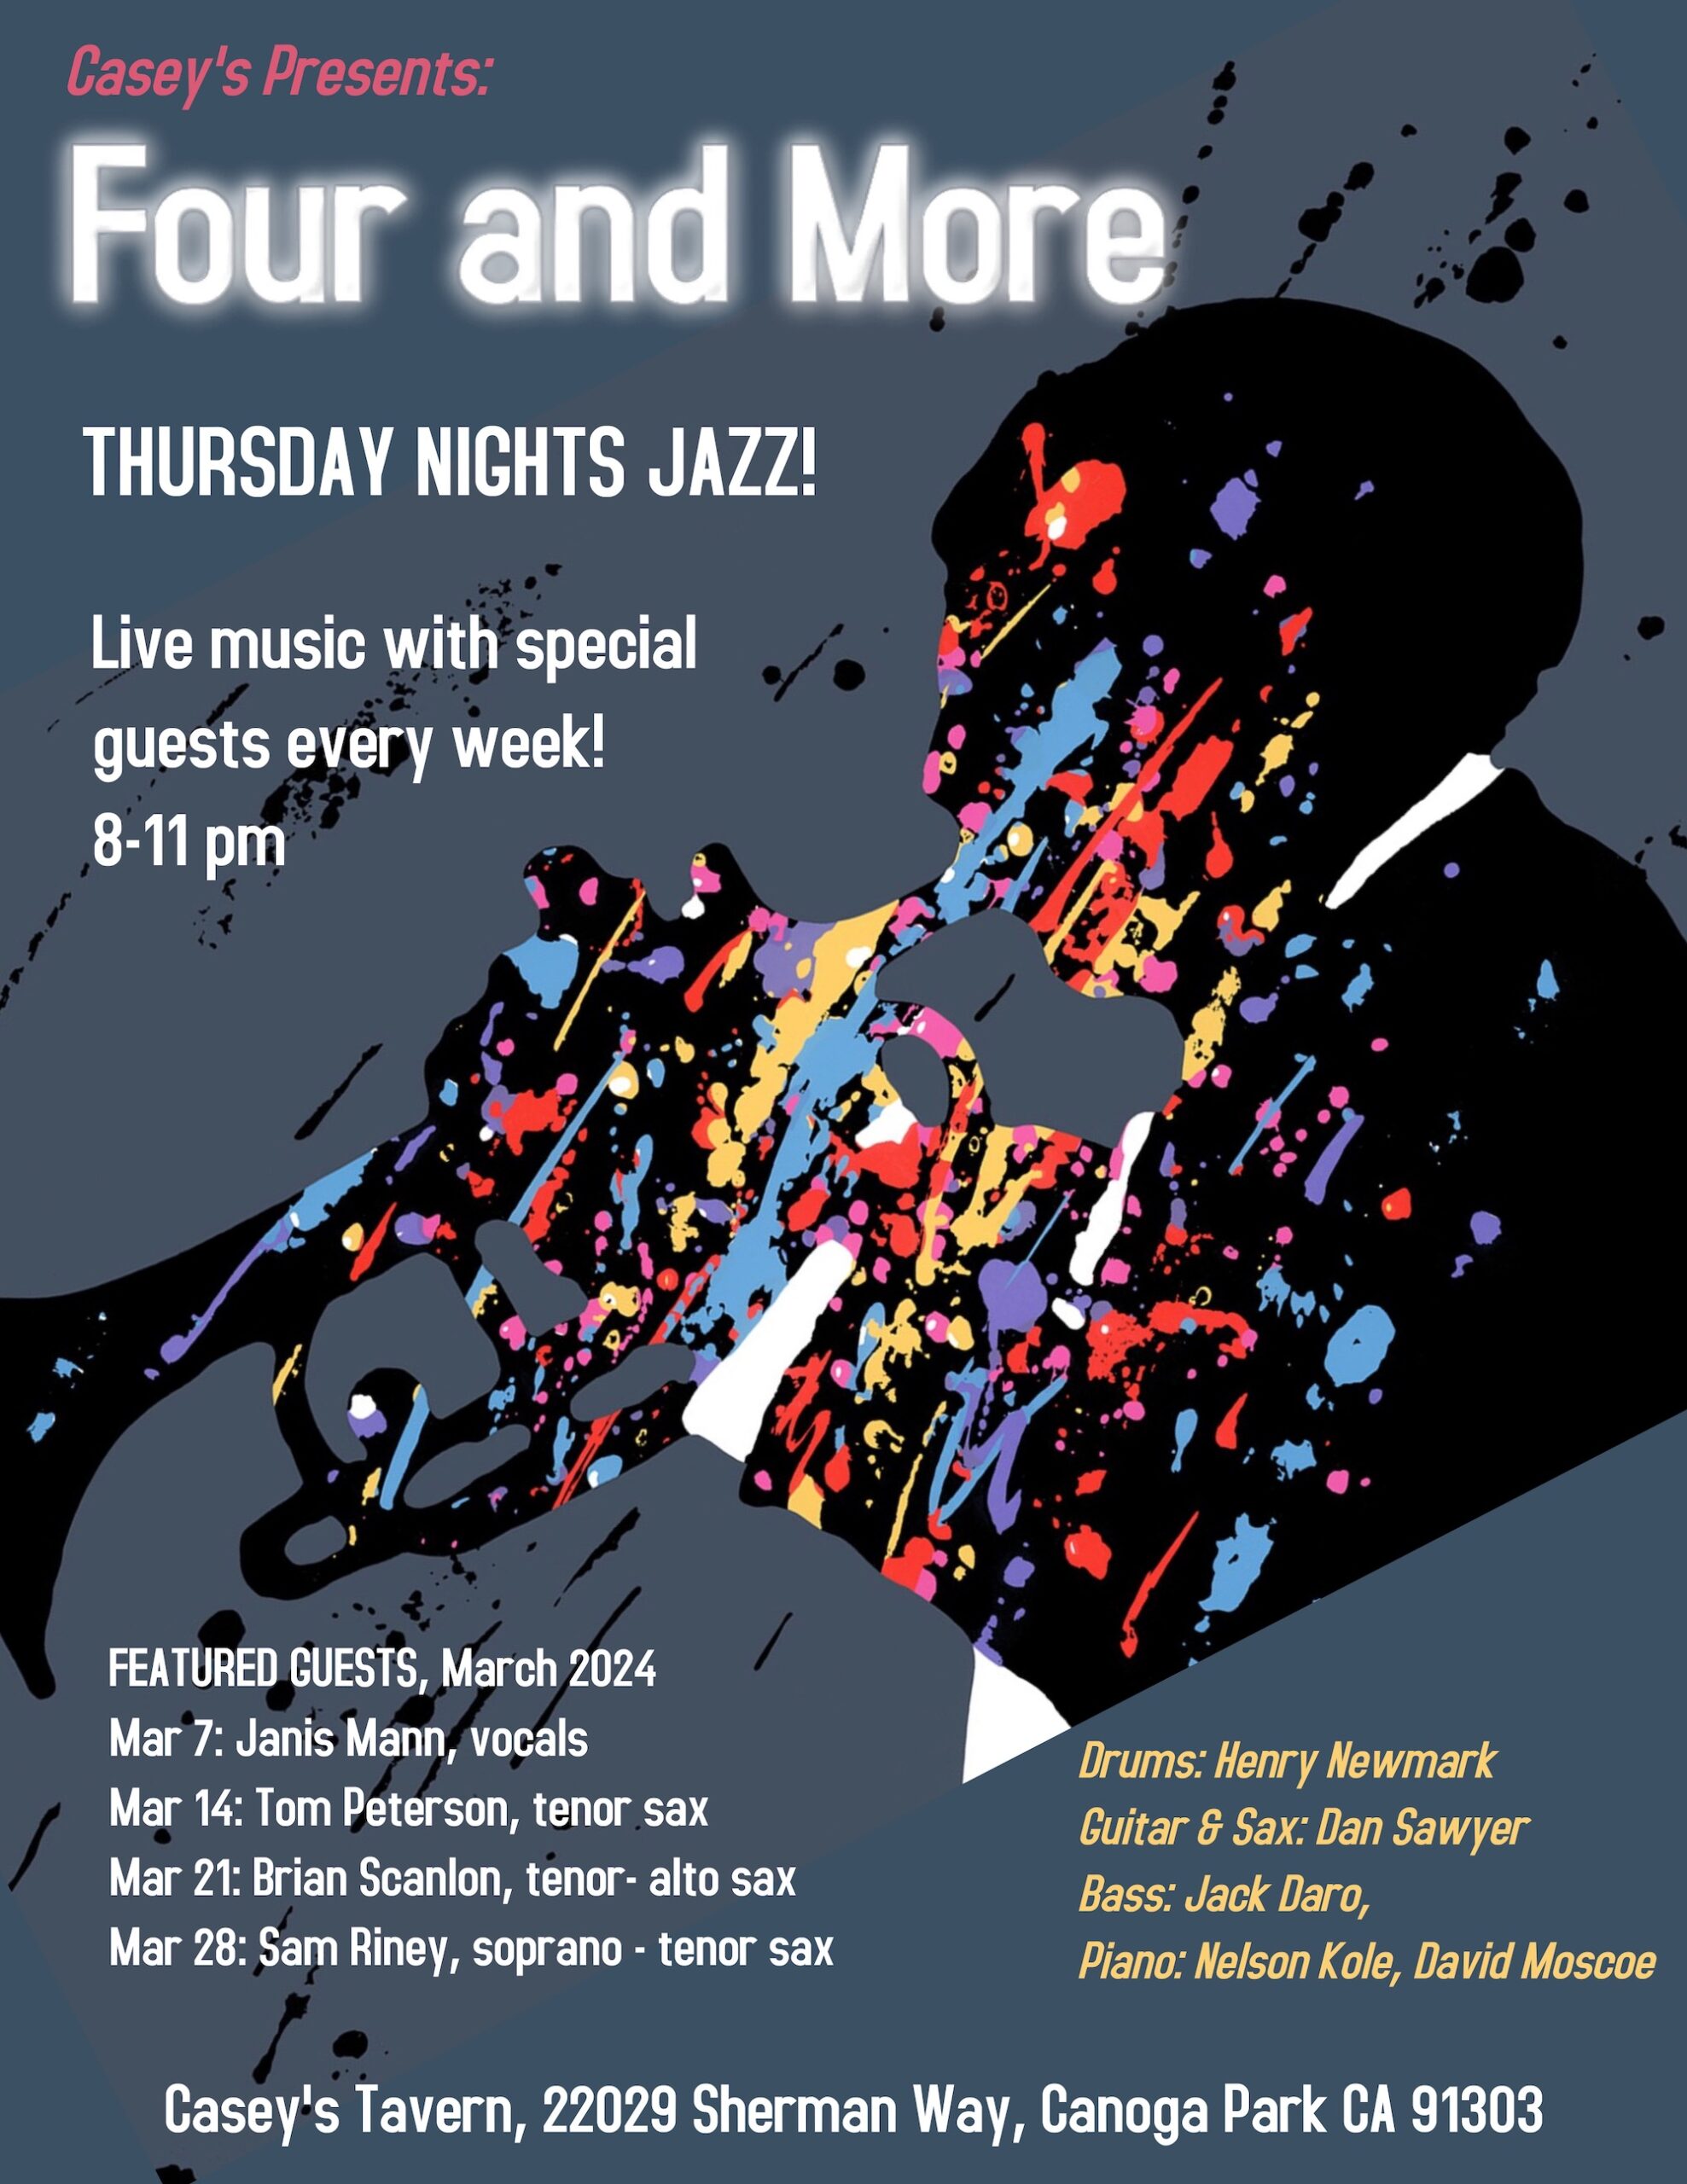 Four and More poster. Thursday nights jazz. Live music with special guest every week. 8-11 pm. Casey's Tavern.